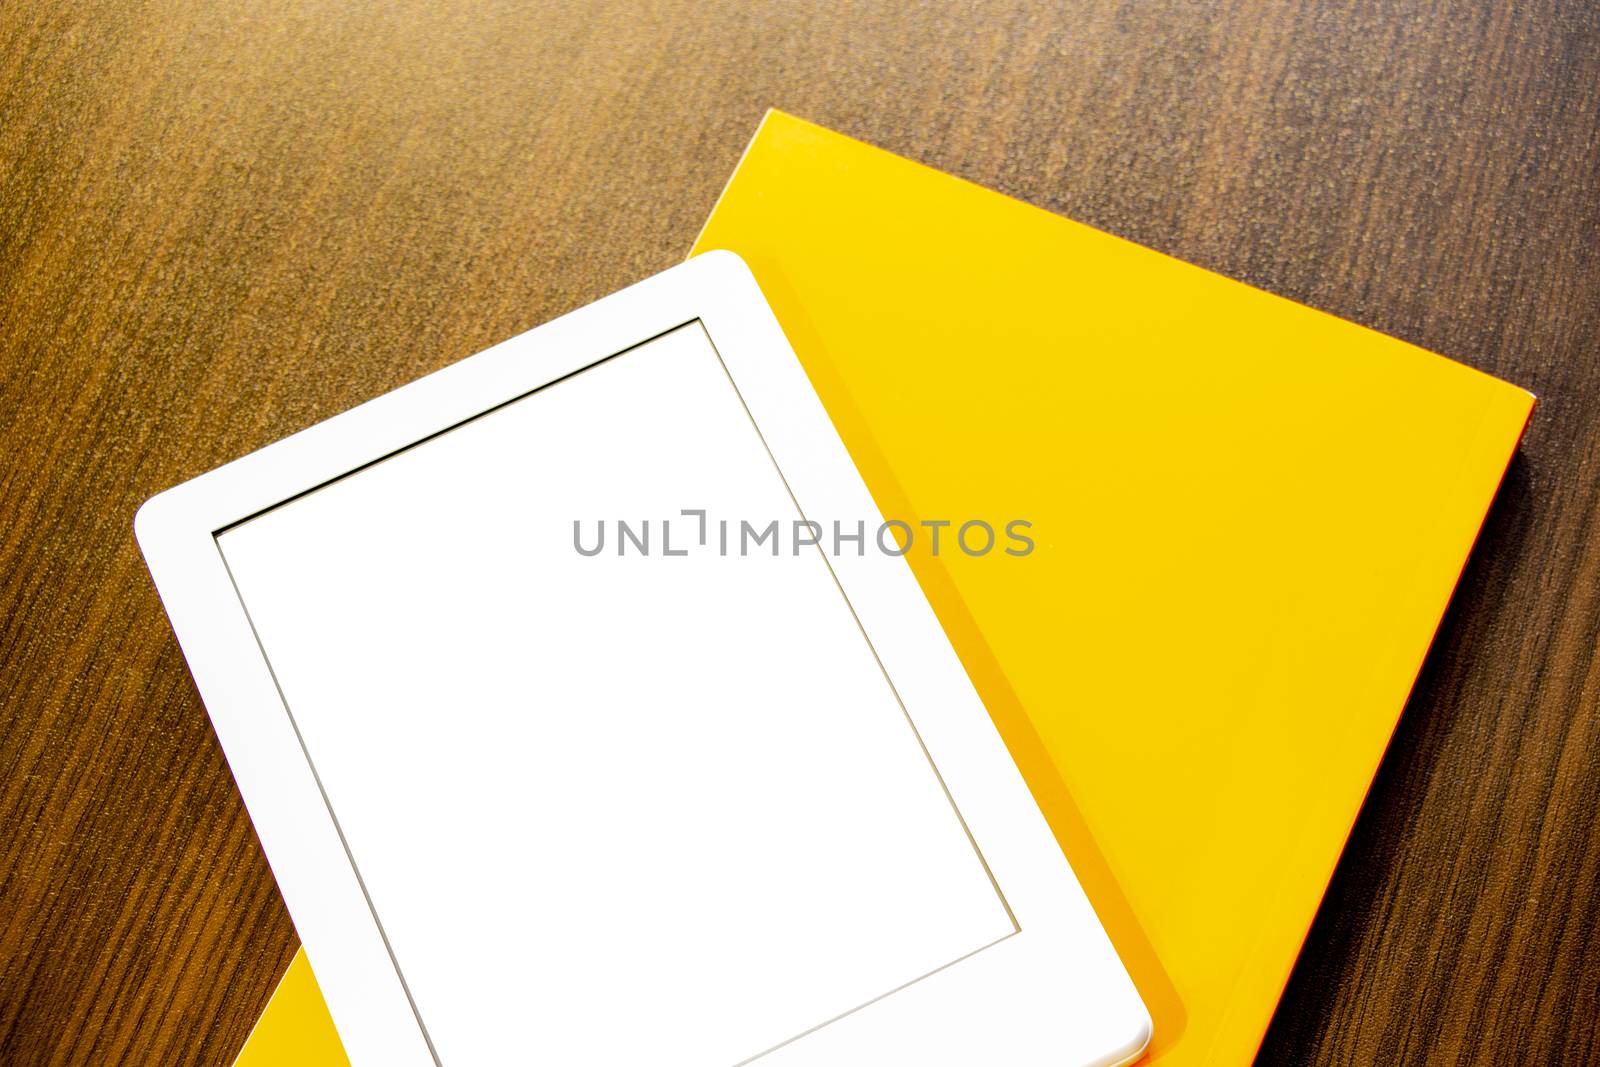 On the table is a portable e-book and paper book. by kip02kas